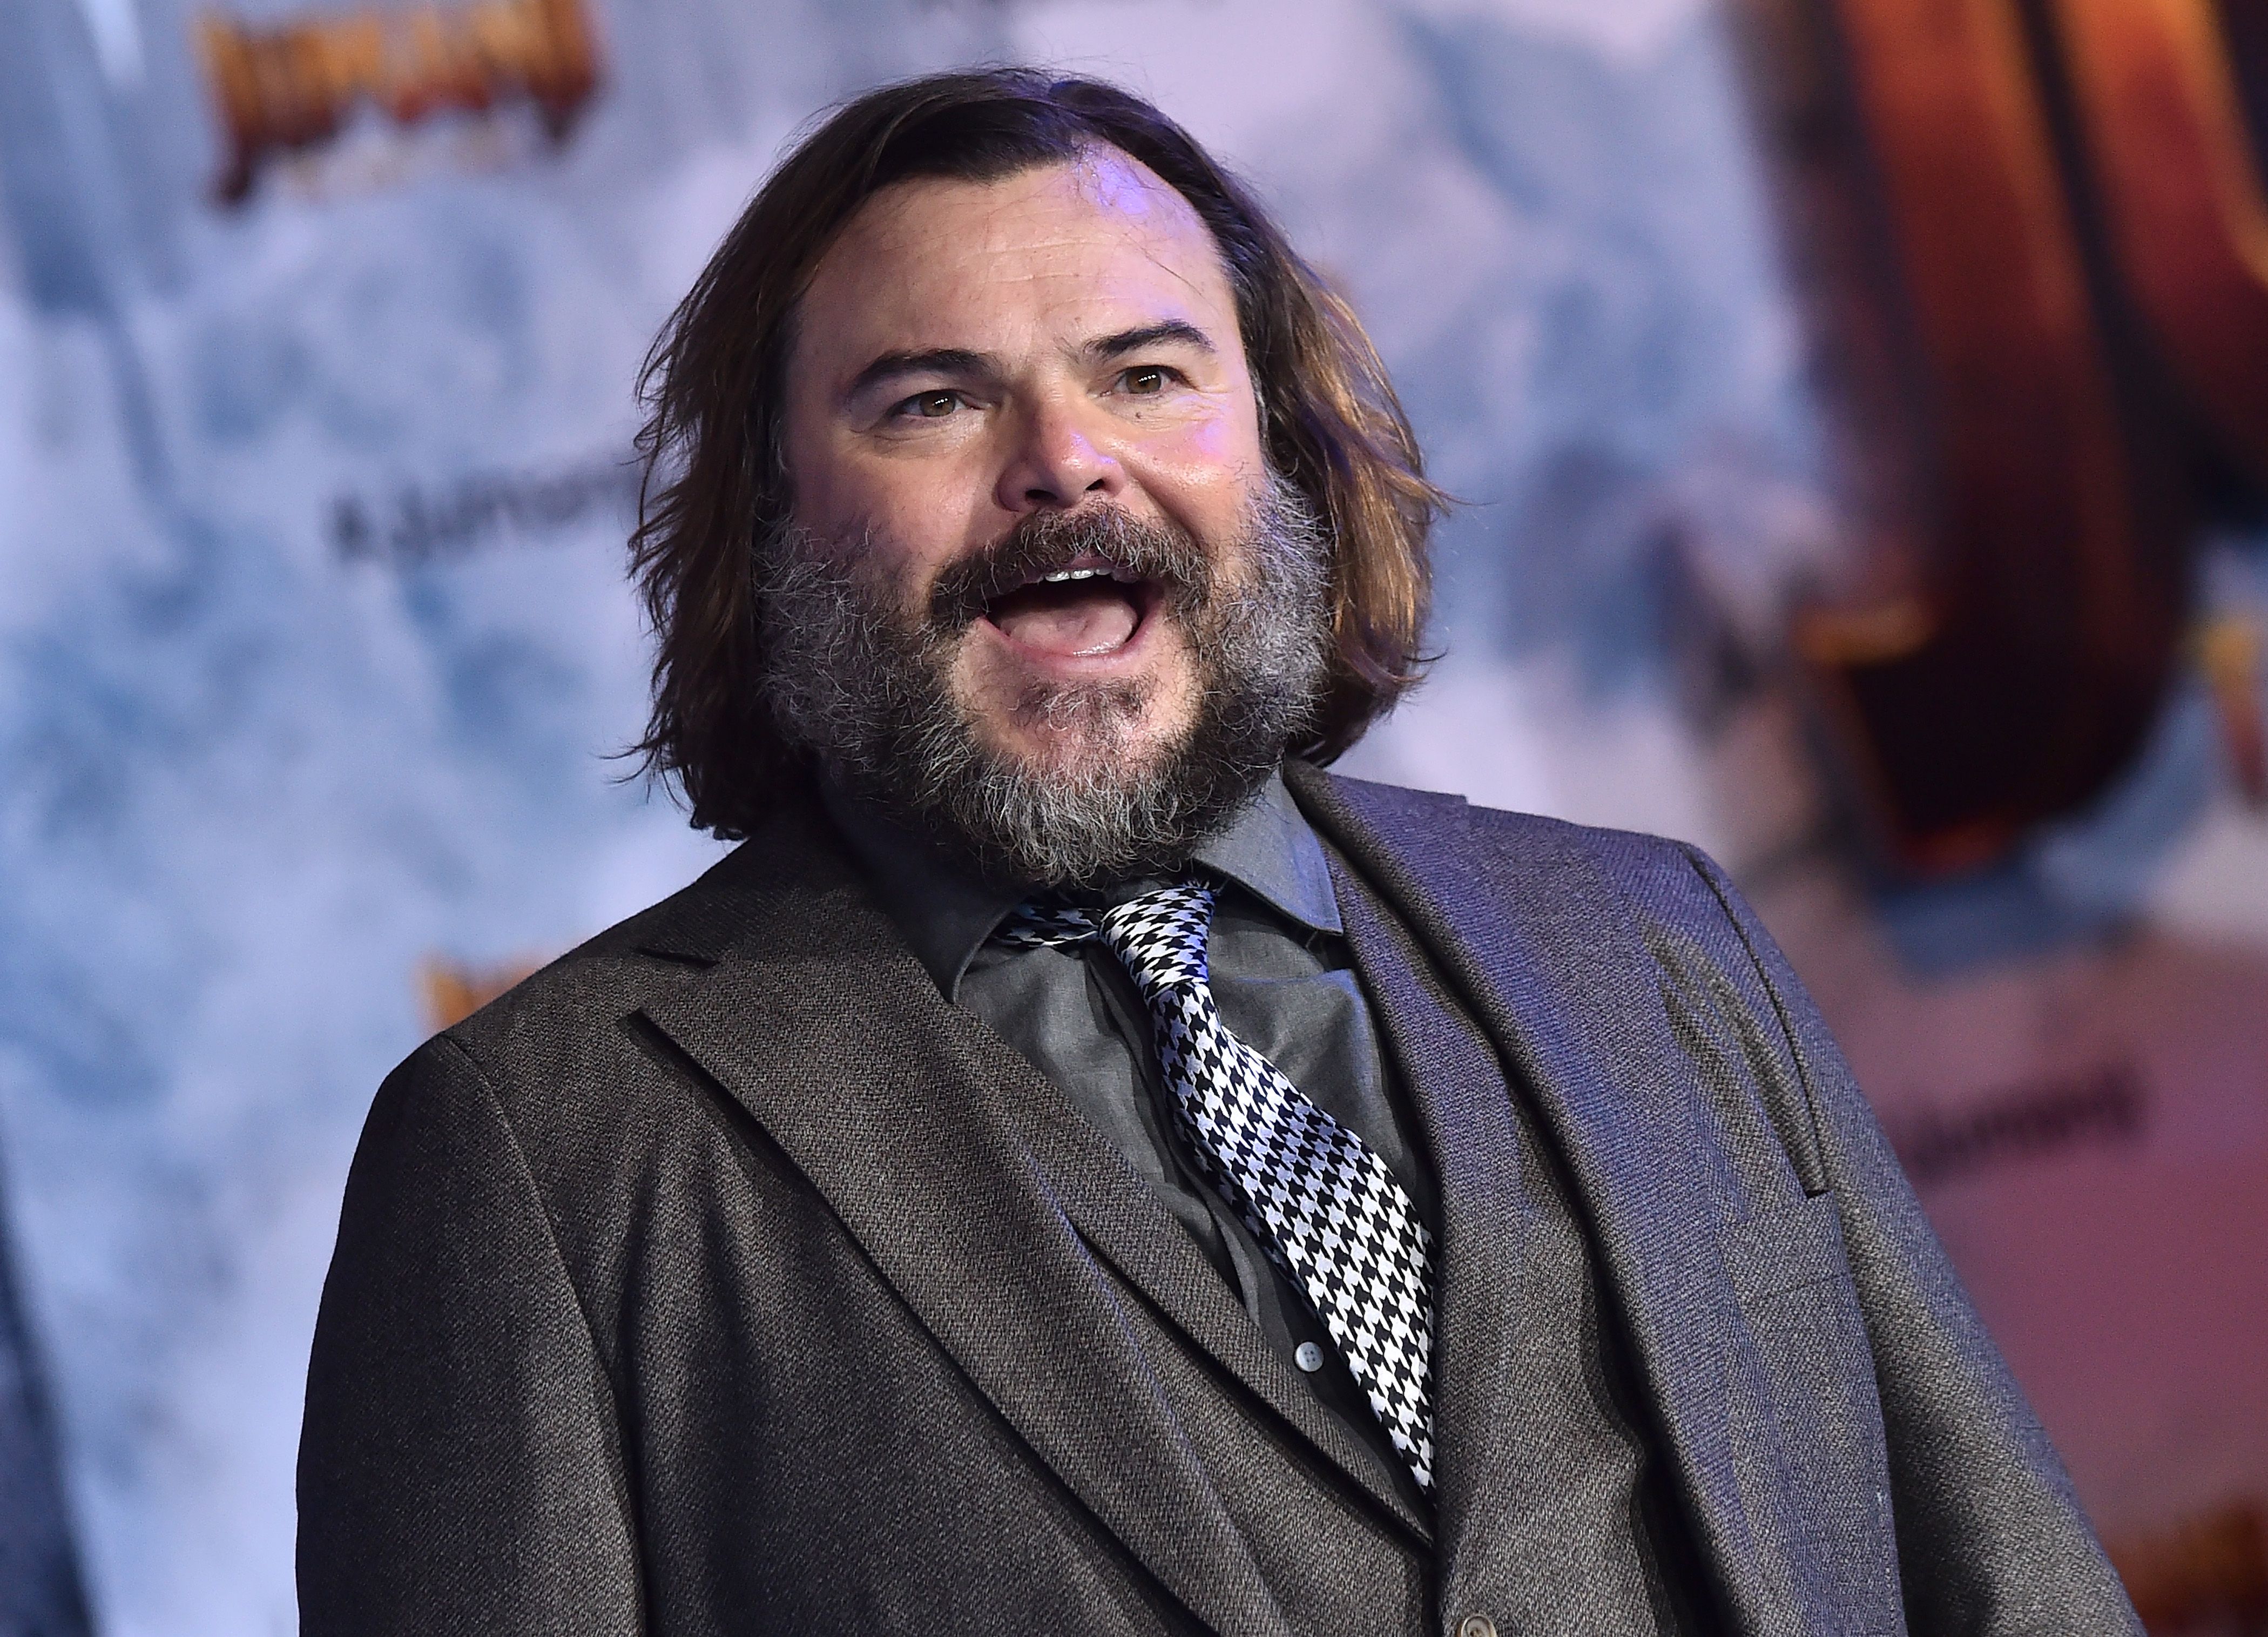 Jack Black Pays Tribute to Kevin Clark After His Death